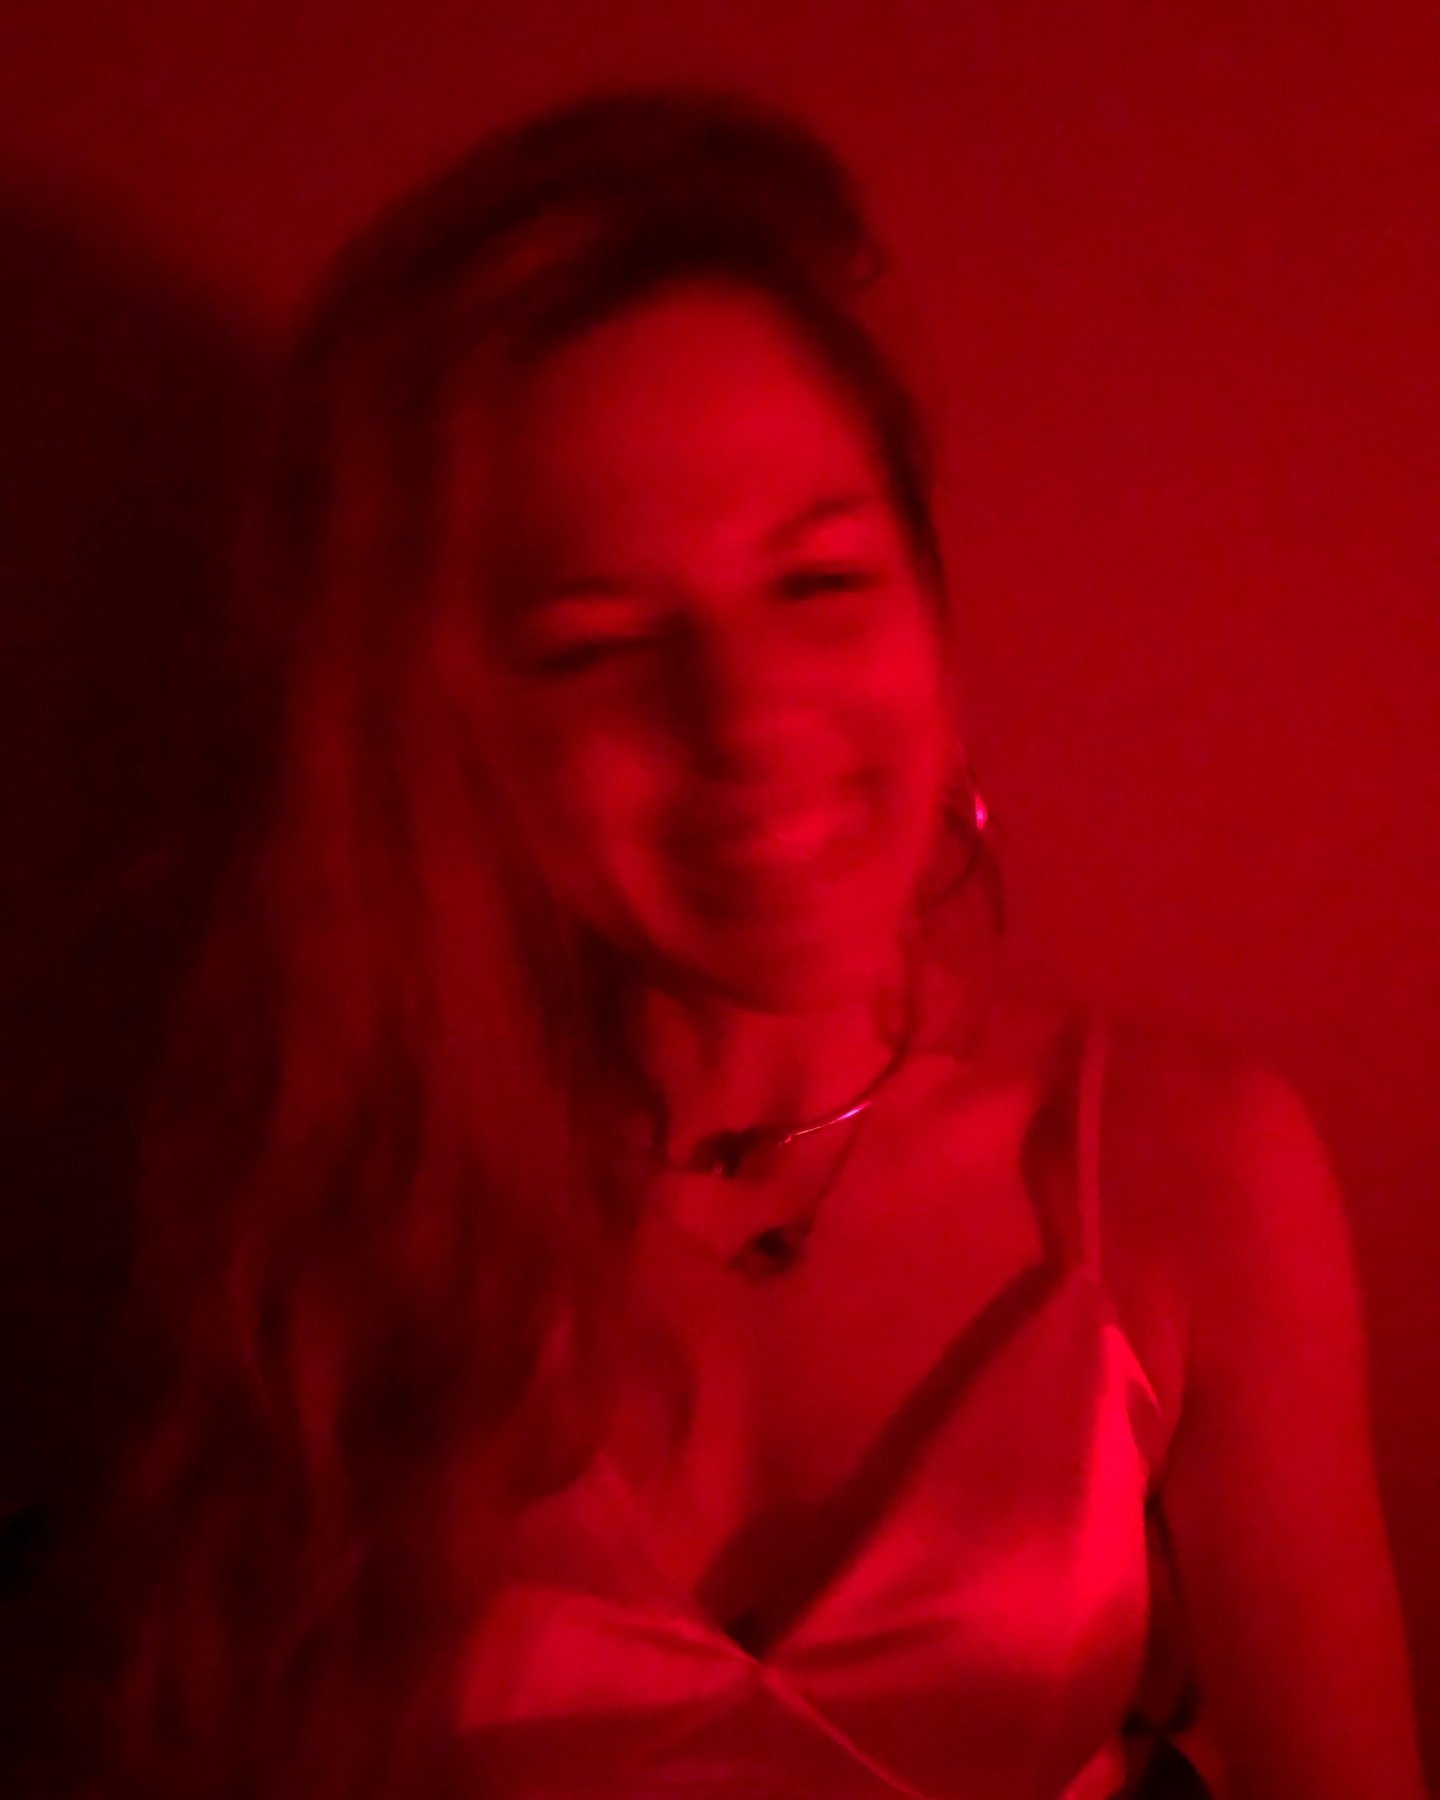 red light in the green room // pre-show joy + face for the algo // here to let you know I&rsquo;m opening for @spaniolmusic at @lightclublampshop this Saturday 4/13 from 10pm-12am, Spaniol will be on from 12-2am ~~~ very excited for this show, you do